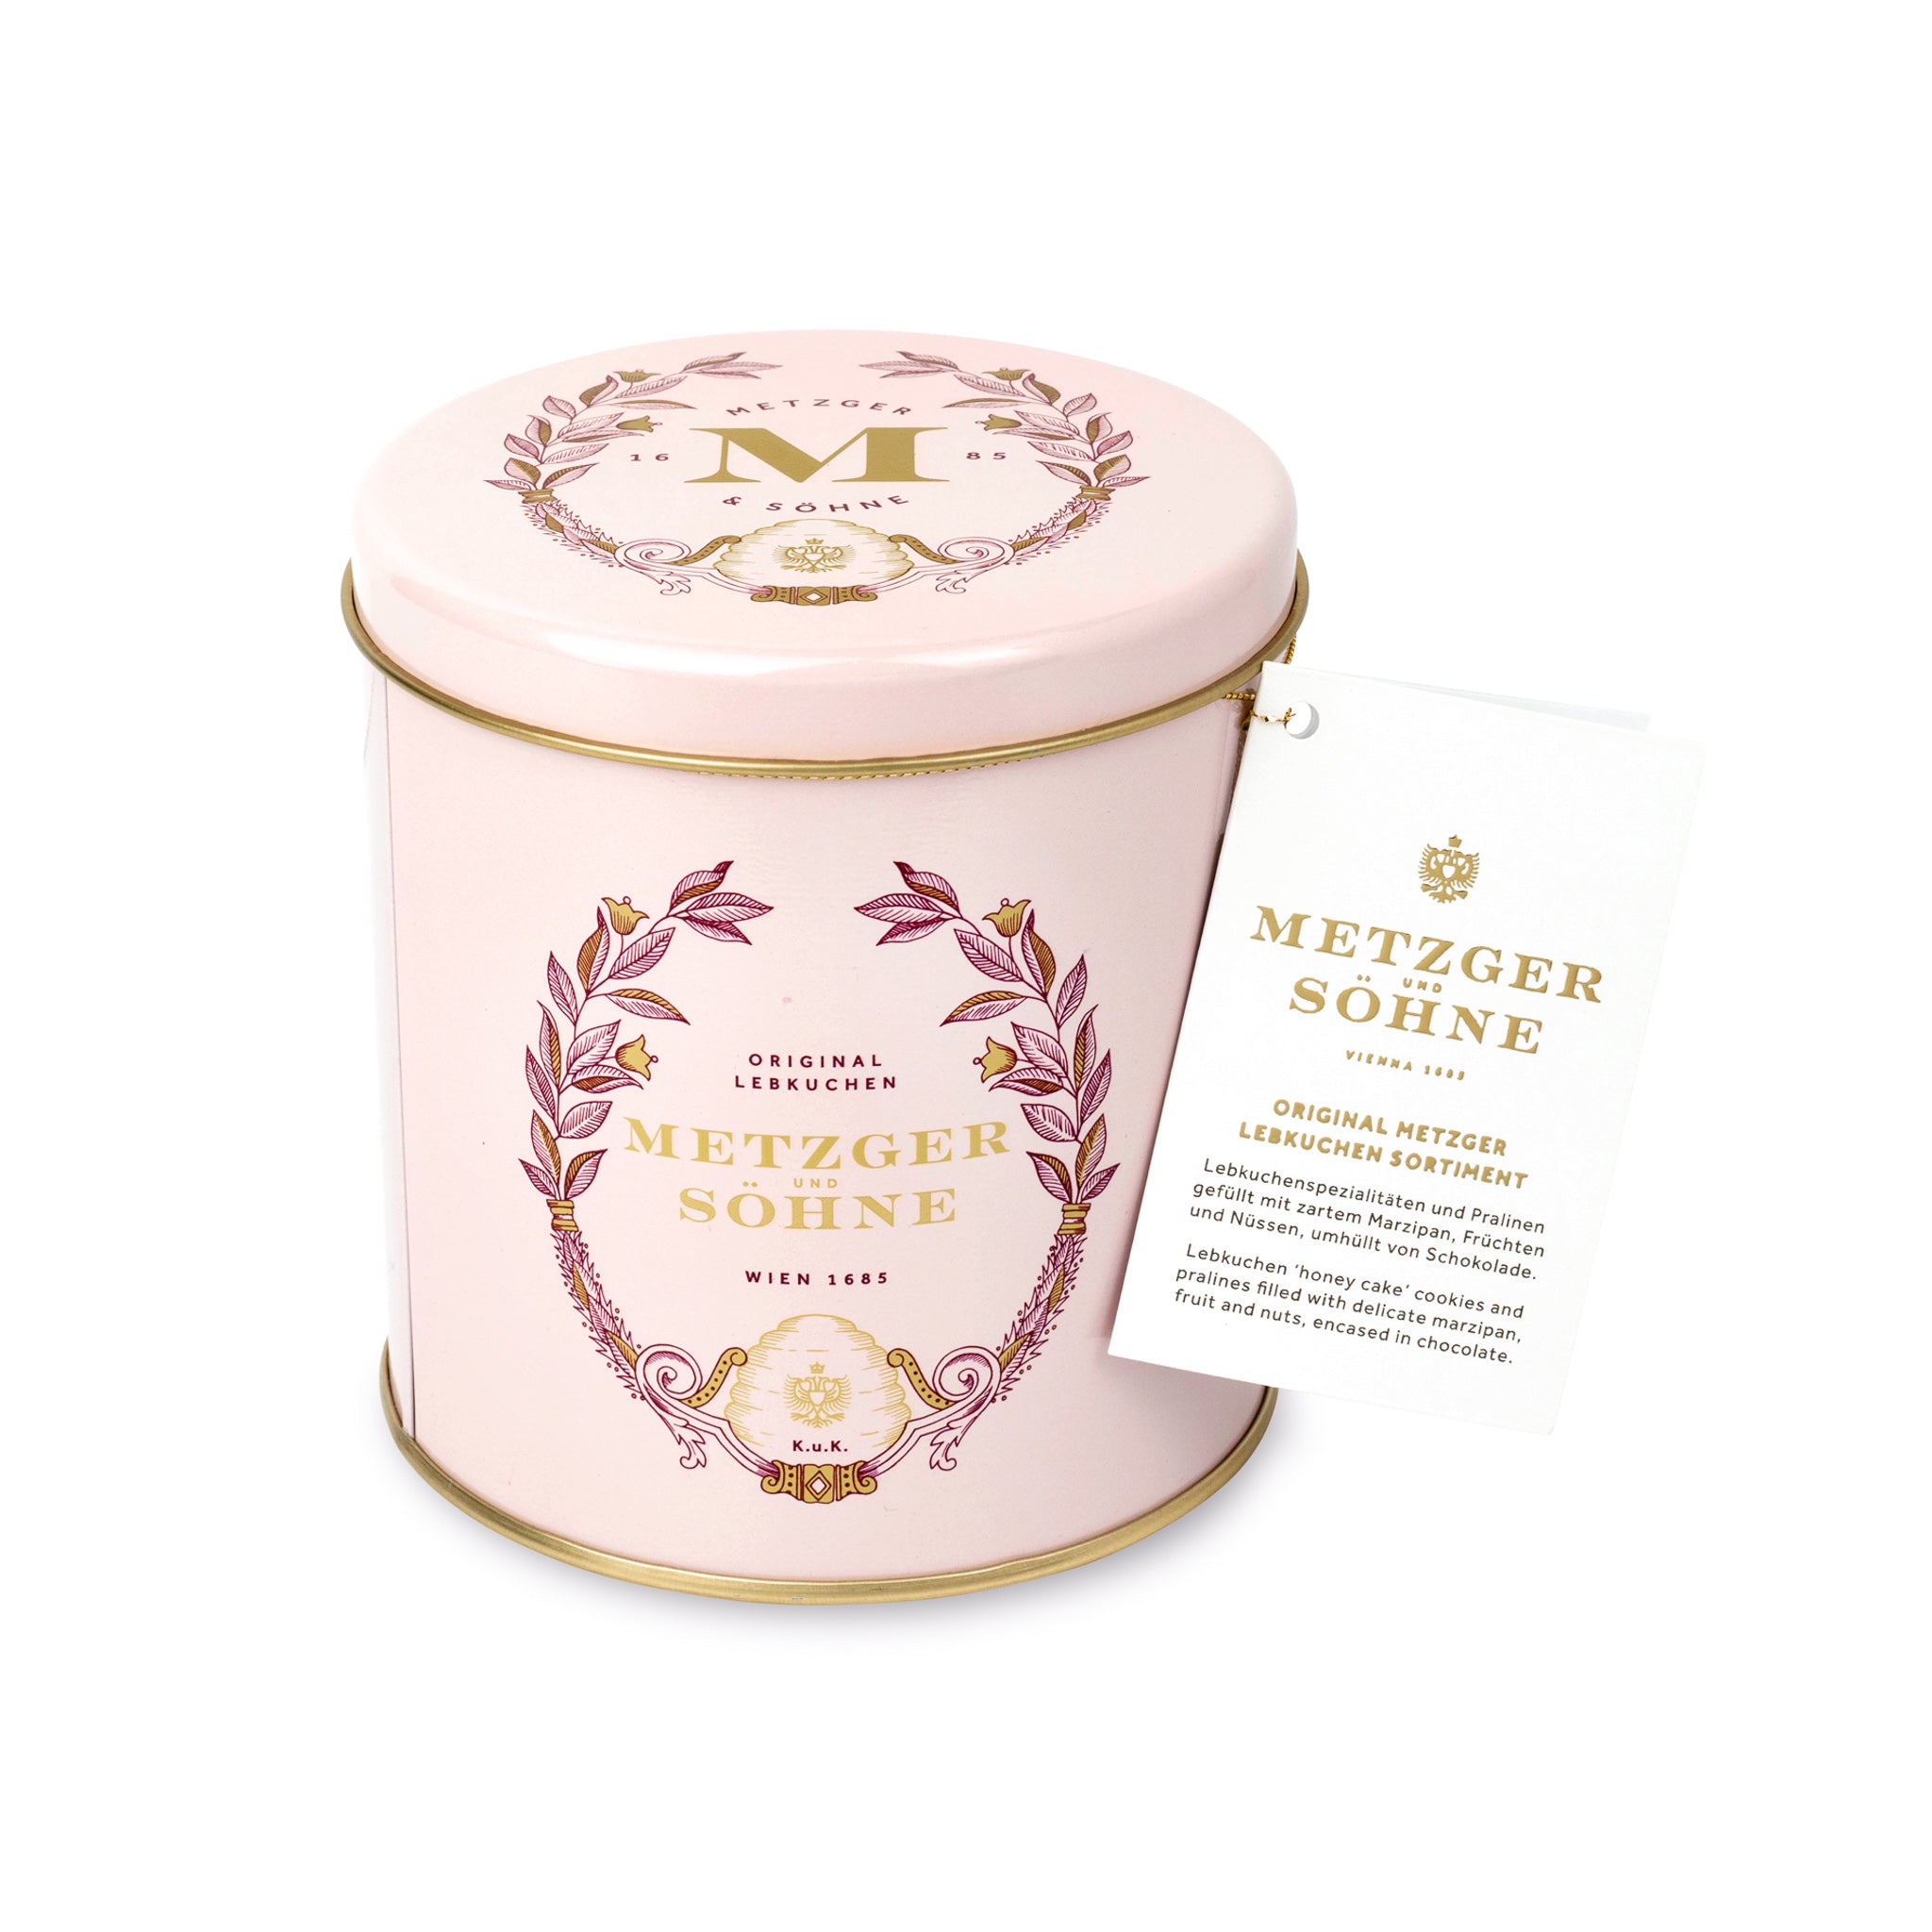 Luxury Metzger gift tin in pink, filled with our popular Lebkuchen cookies and chocolate pralines. There are 10 opulent praline types, from marzipan mixes to fruit jellies, jams and nut fillings, coated in chocolate. The Lebkuchen cookies include our fruit bread with dried fruits and nuts, basler with a cherry undertone, chocolate robbins, signature house Lebkuchen and Aranzini Lebkuchen minis. A perfect Lebkuchen taster gift or selection for the Christmas table.